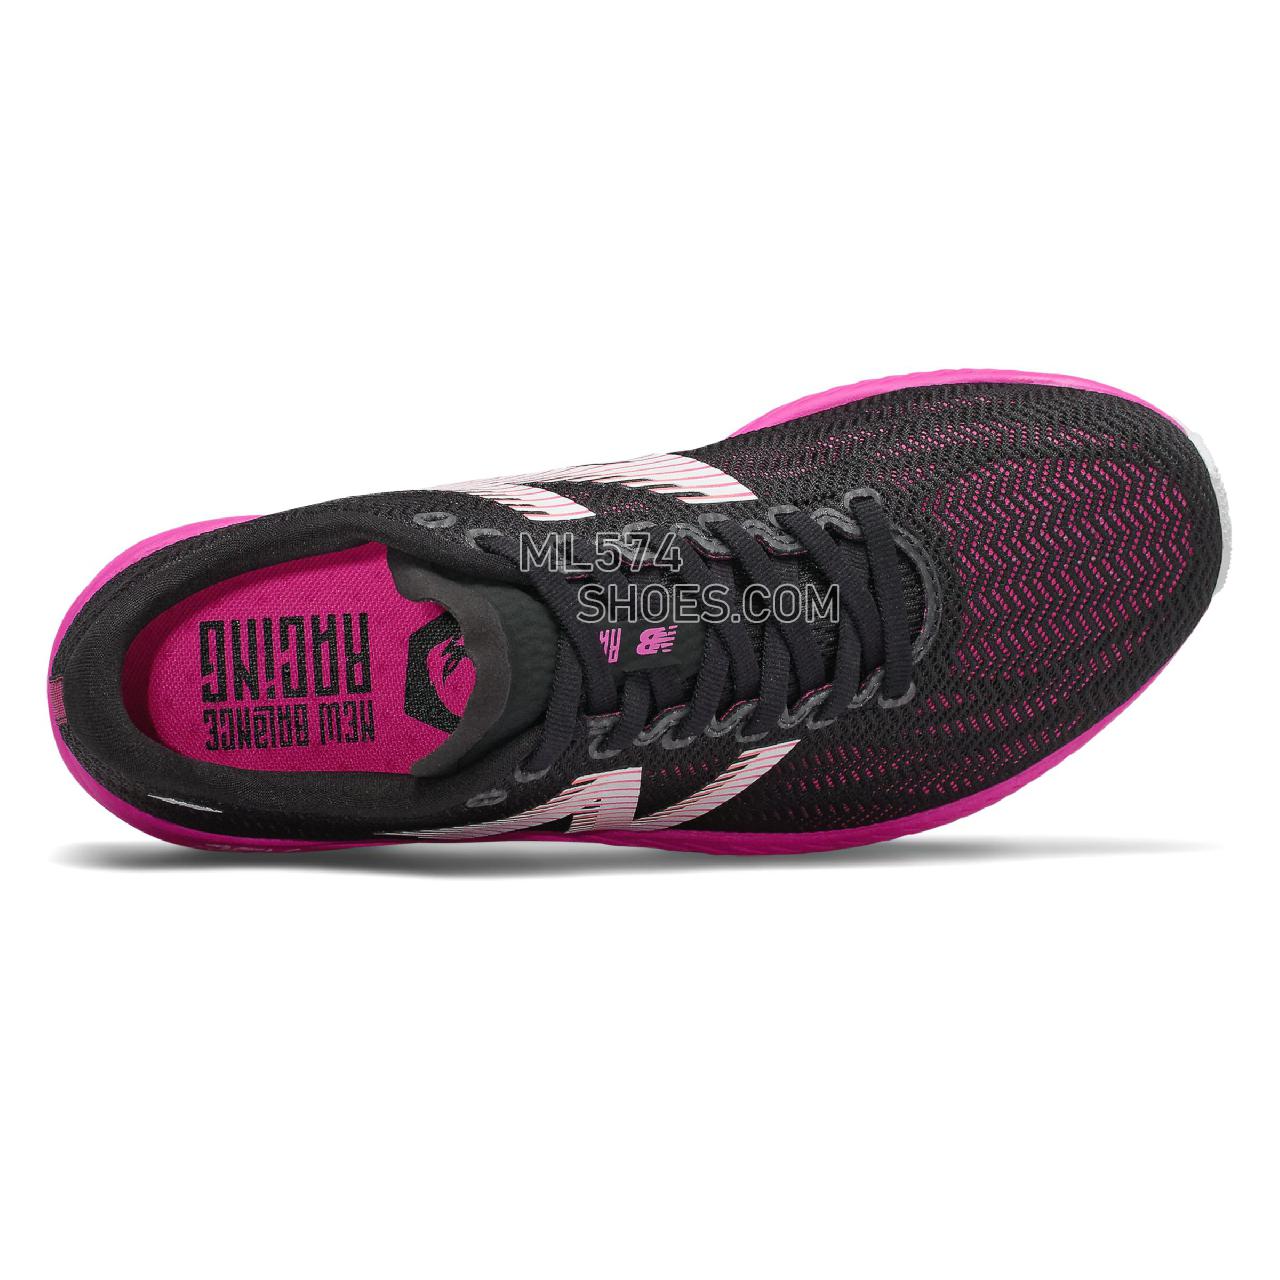 New Balance 1400v6 - Women's Track Spikes And Cross Country - Black with Peony - W1400RP6